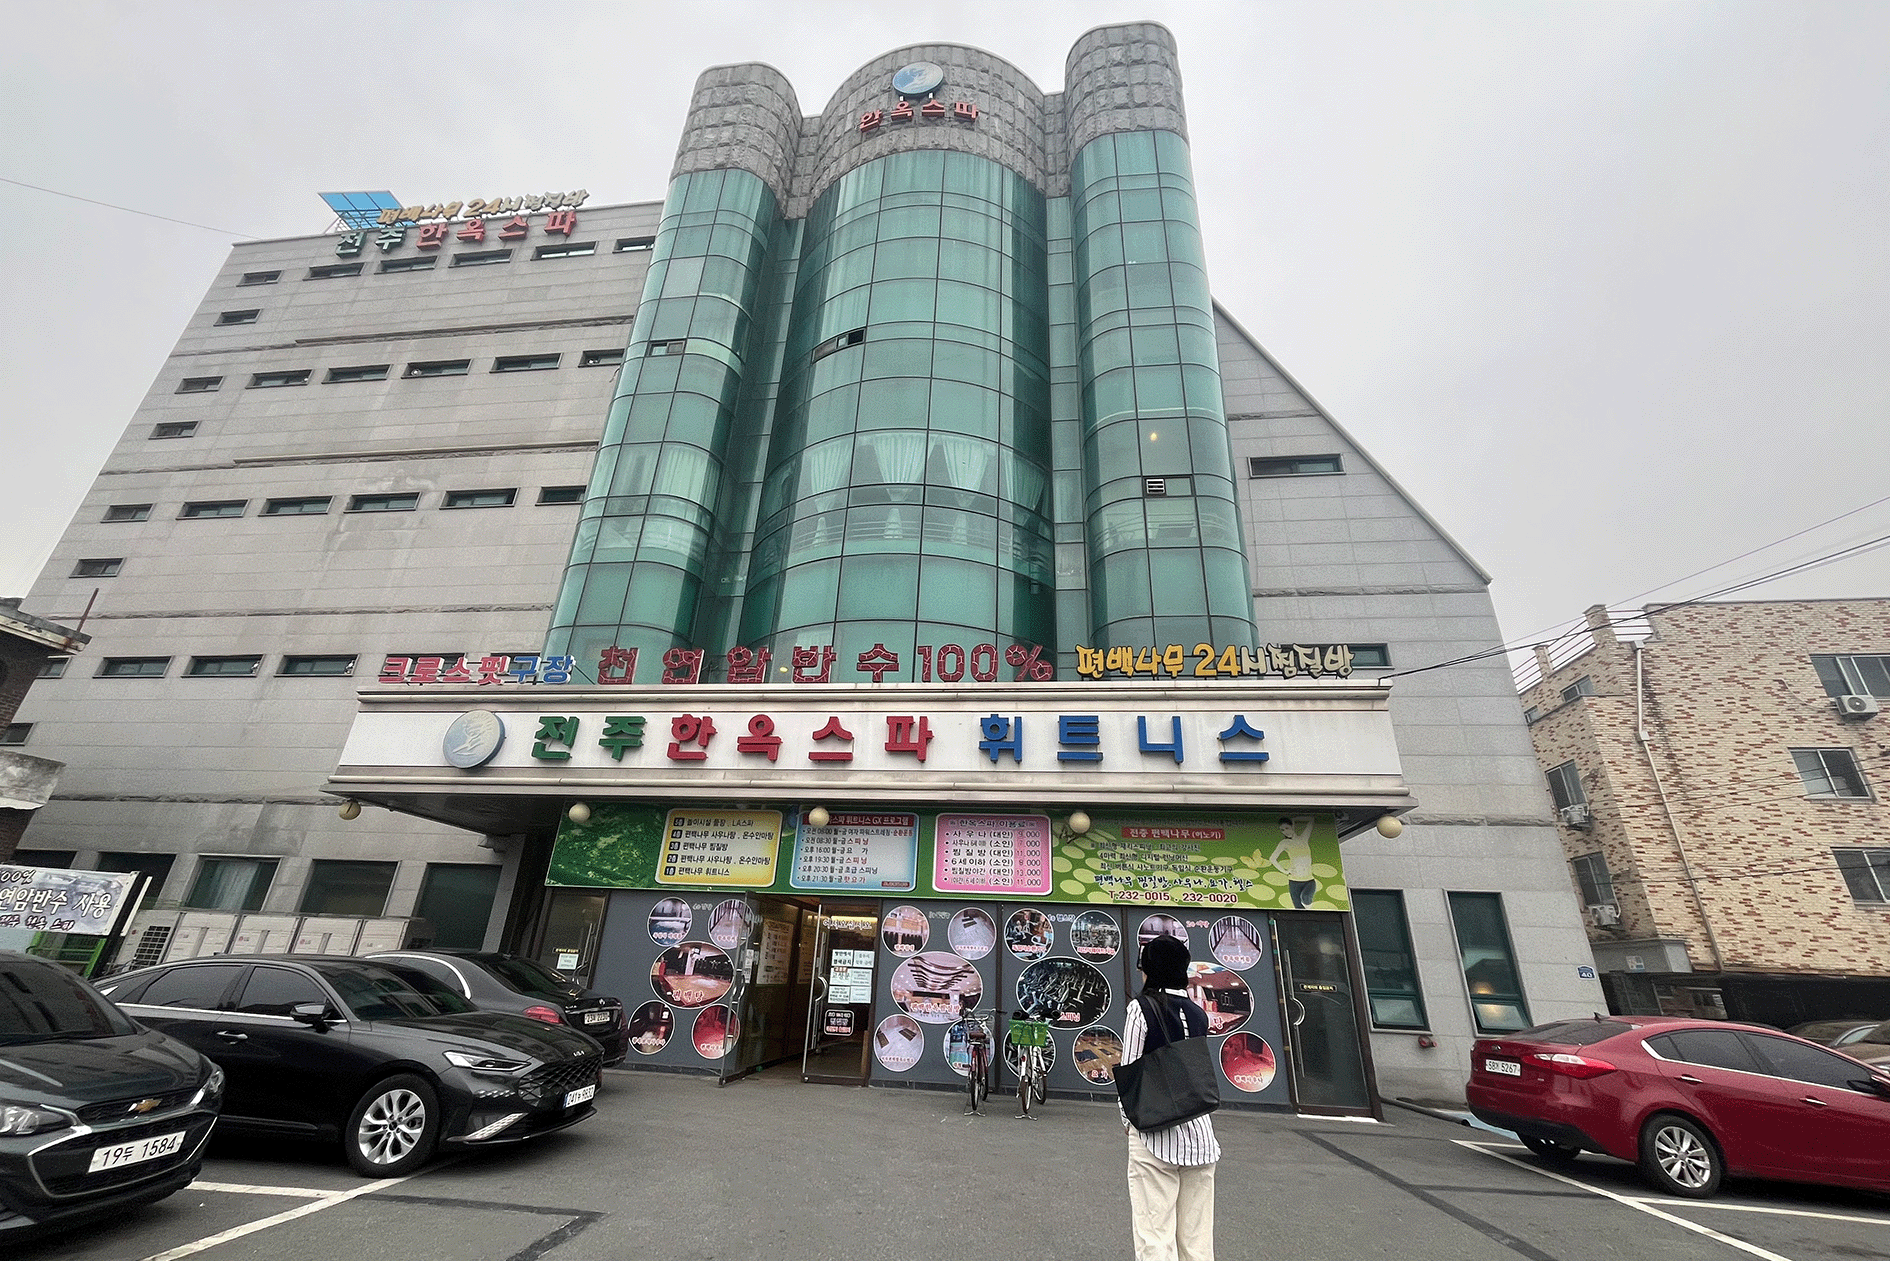 Exterior view of a building with signs, a person with backpack standing in front, parked cars visible